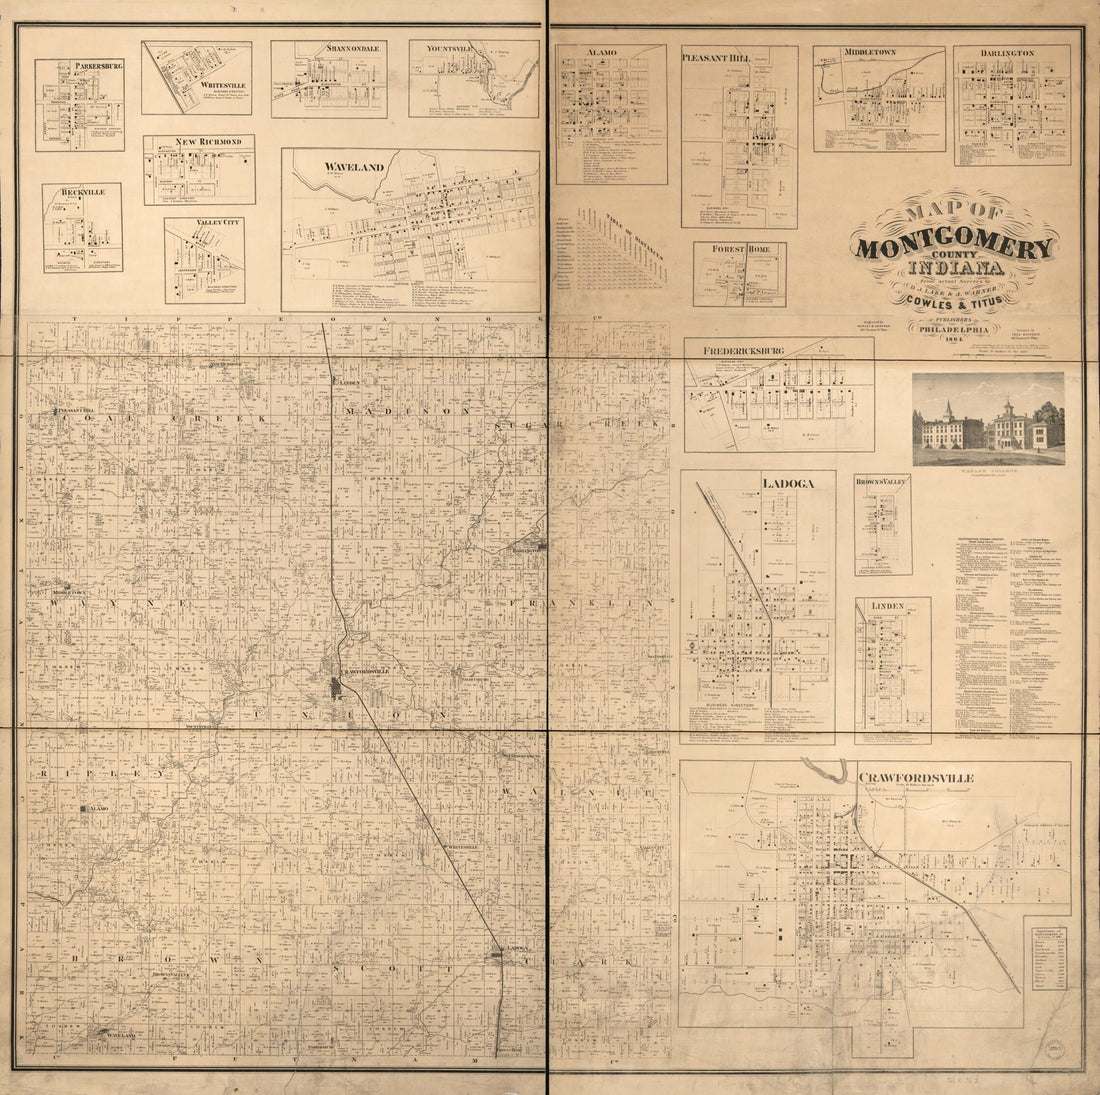 This old map of Map of Montgomery County, Indiana from 1864 was created by F. (Frederick) Bourquin, D. J. Lake, A. Warner,  Worley &amp; Bracher in 1864